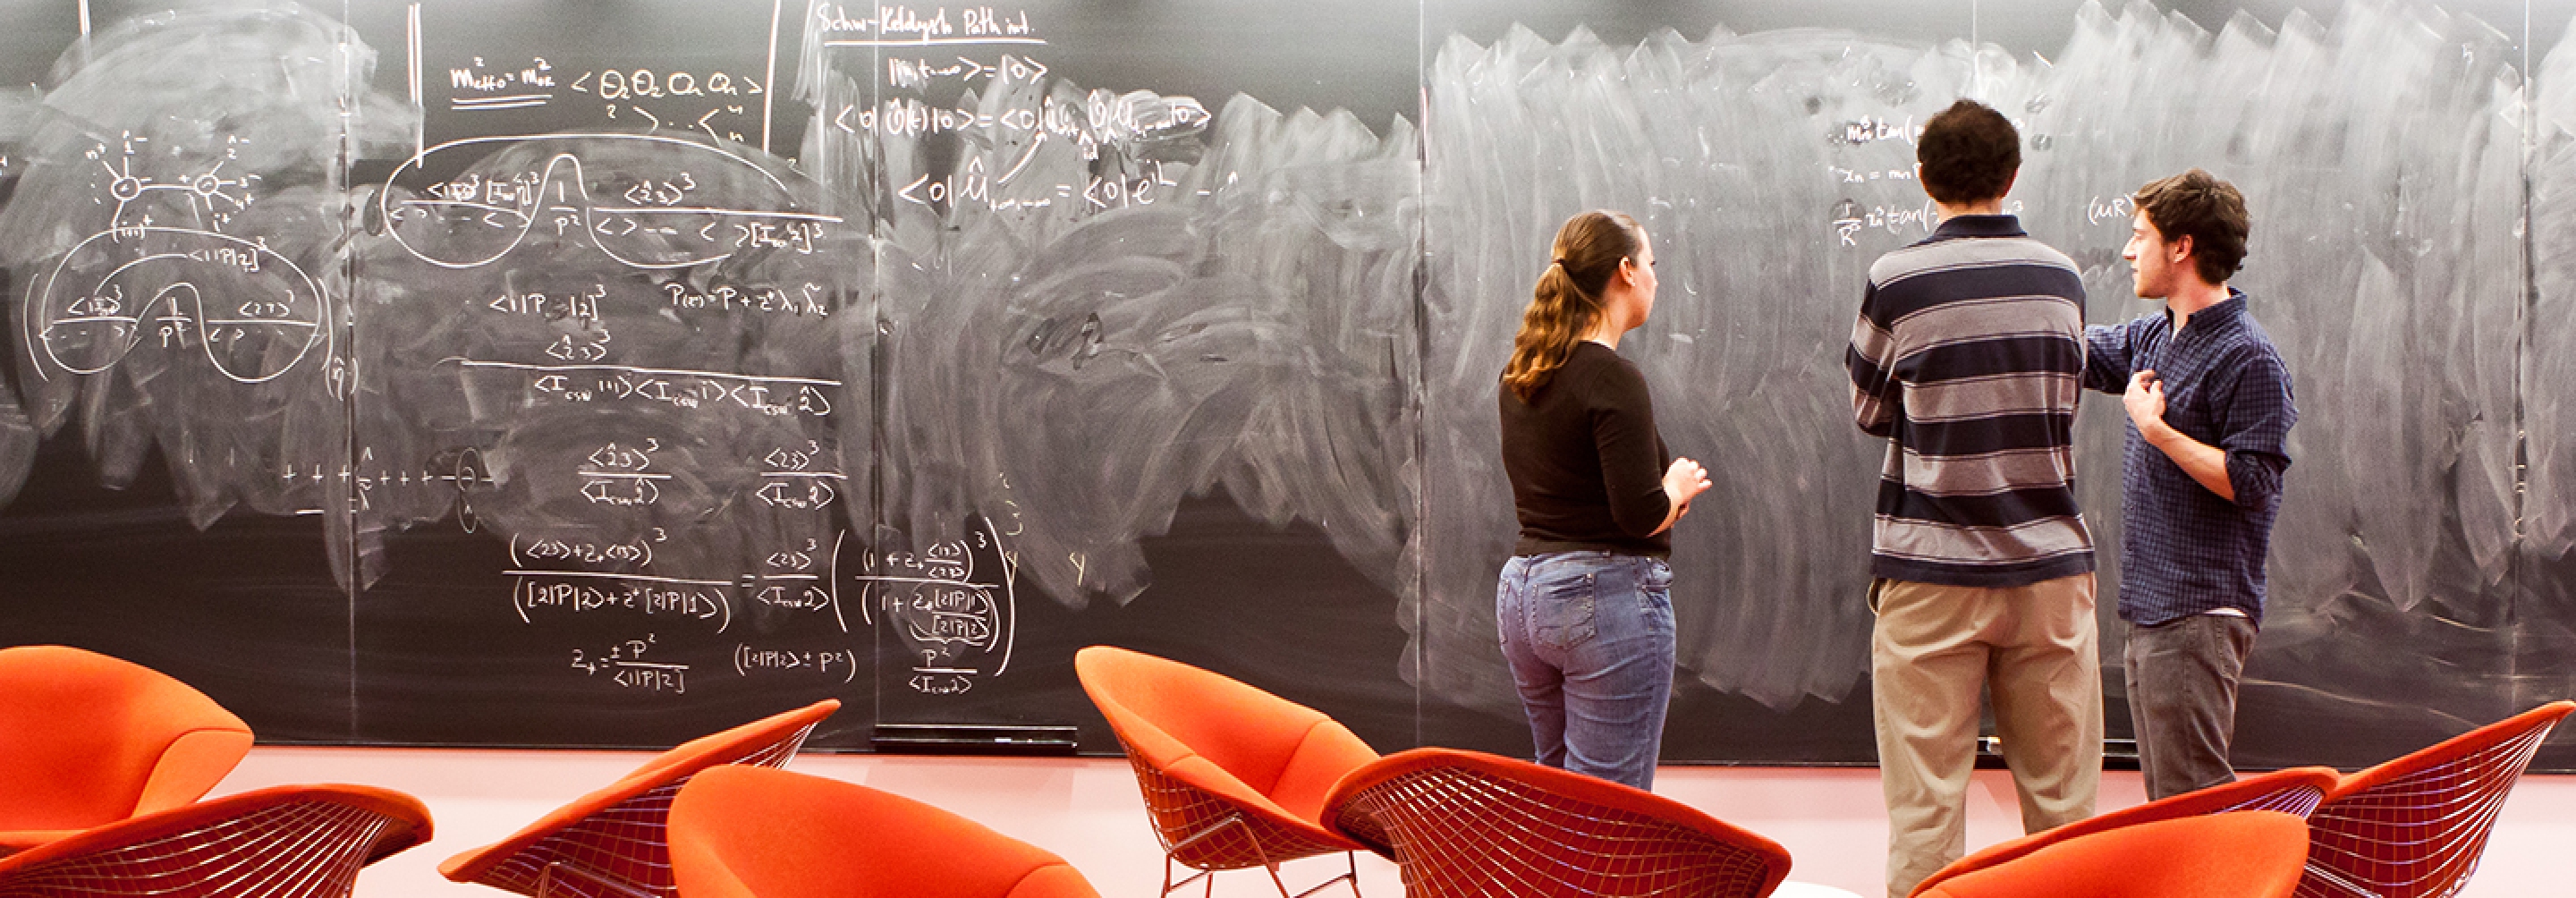 three researchers discussing in front of a blackboard in the sky room